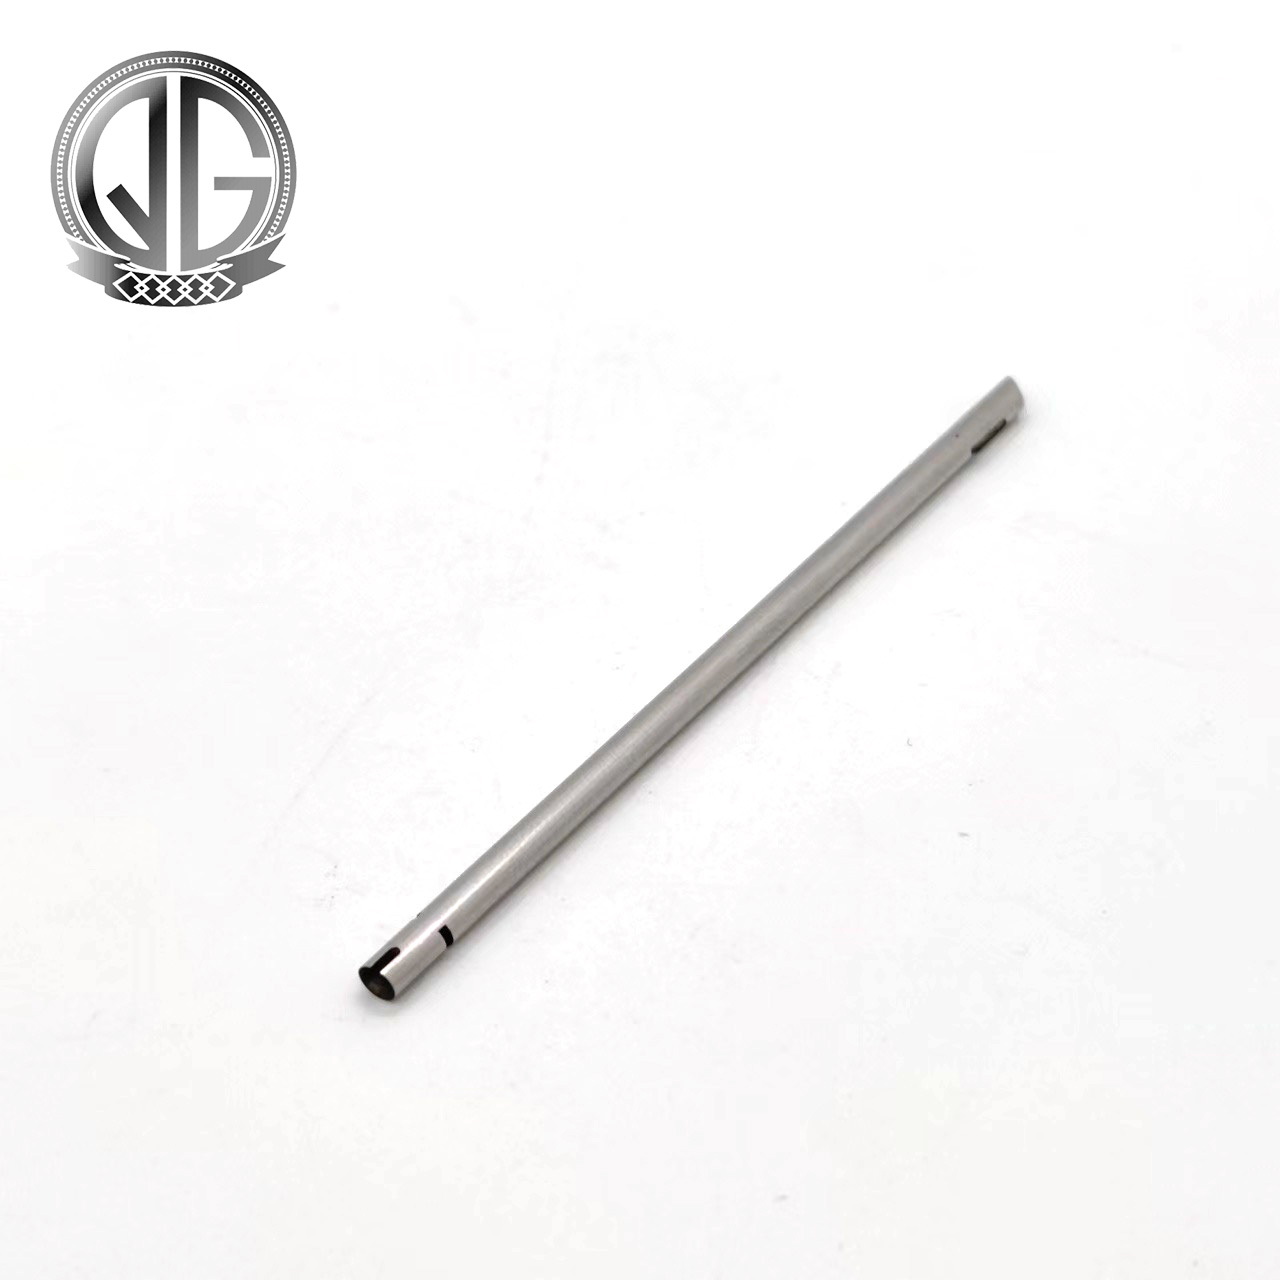 China Wholesale benchtop bender Suppliers –  Stainless Steel Tube of Ultrasonic Scalpel Device for Medical use – Step-By-Step